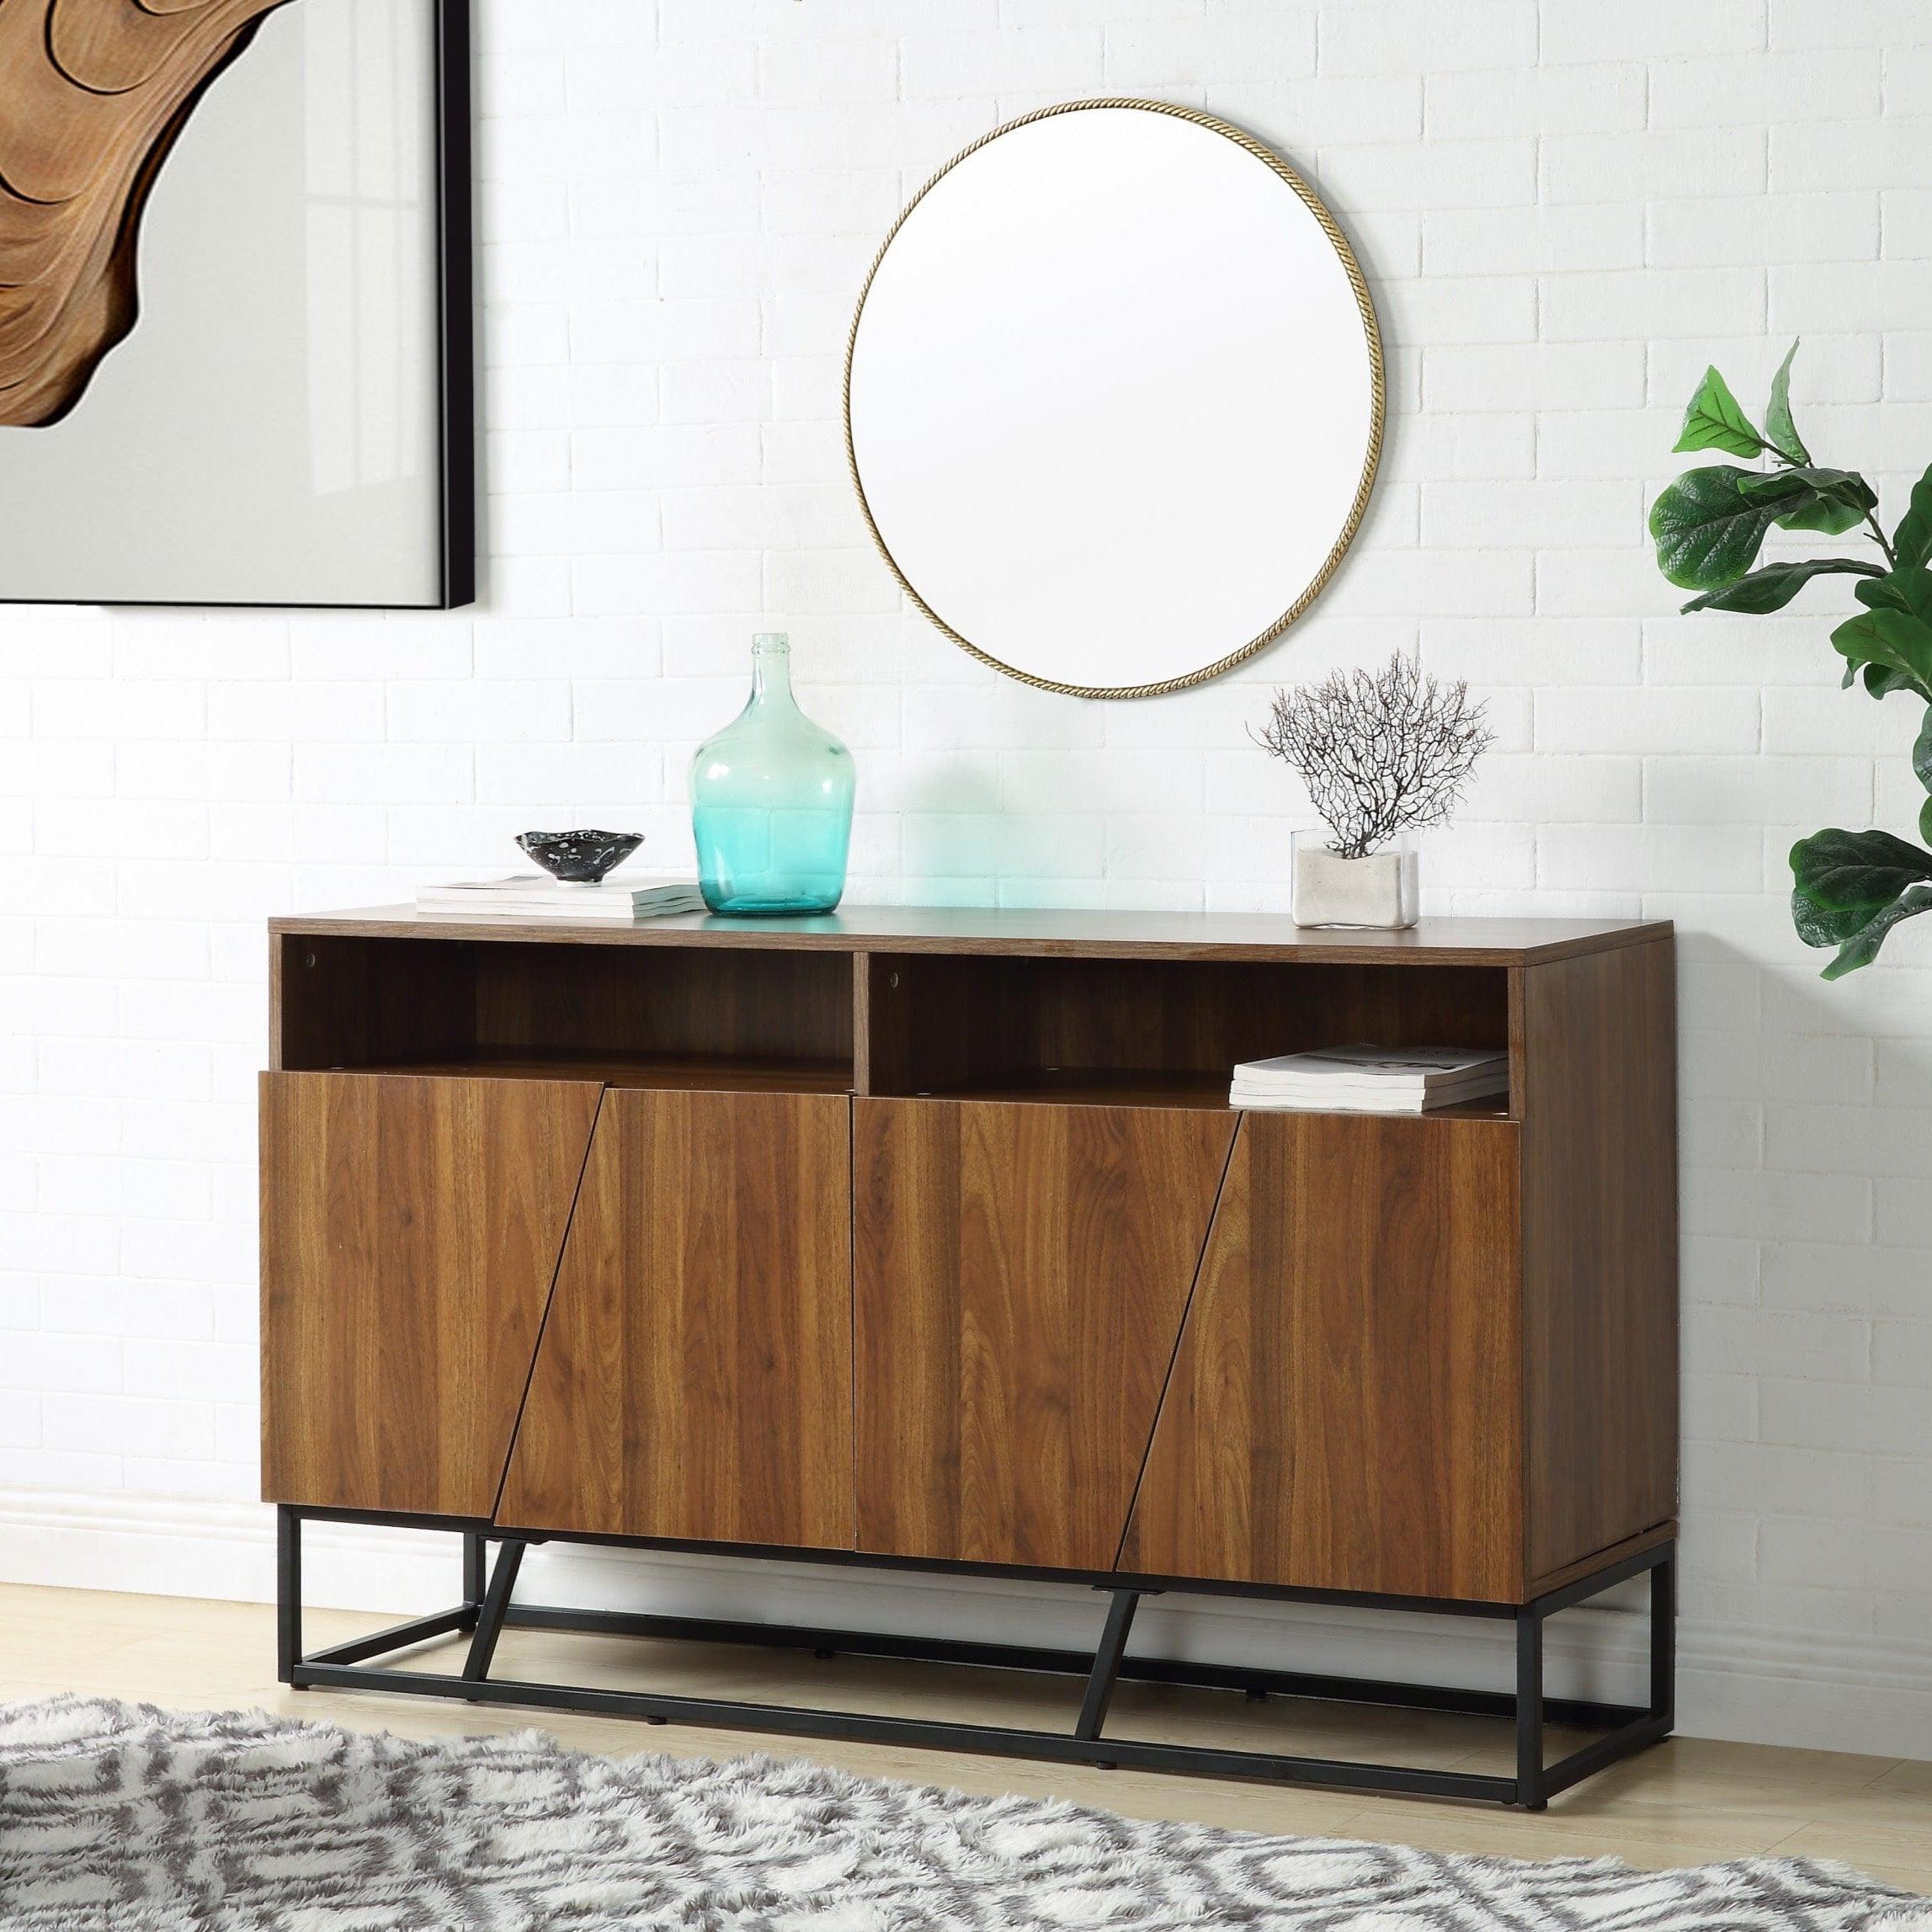 Shop ACME Walden Console Table in Walnut Finish AC00795 Mademoiselle Home Decor